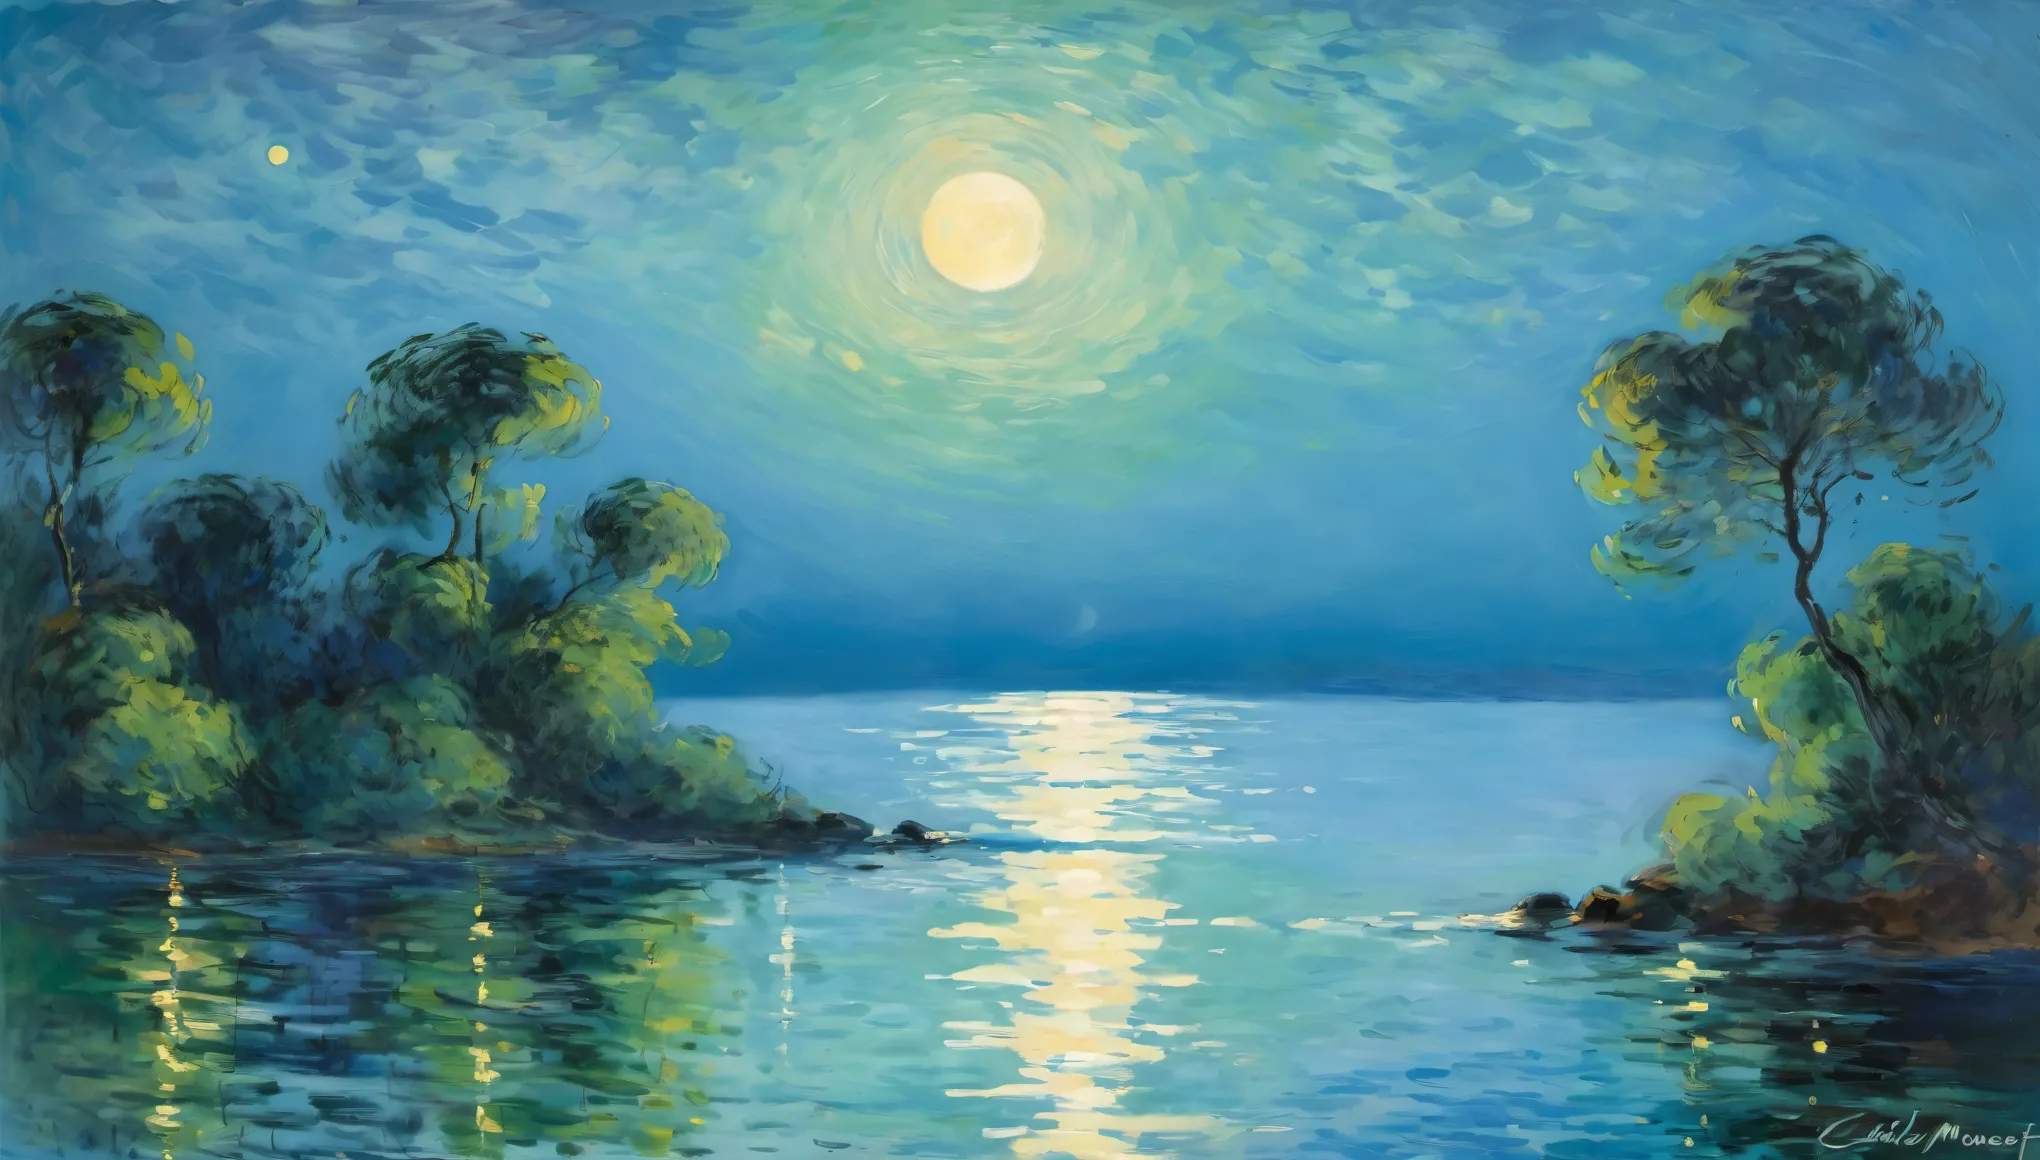 This impressionist painting captures the enchanting beauty of nature, (Blue Coast), The sky fades from green to blue, while the water reflects the moon's glow, drawing the eye to the distance. Signed by Claude Monet, it showcases his unique style and masterful technique, a treasure worth admiring.